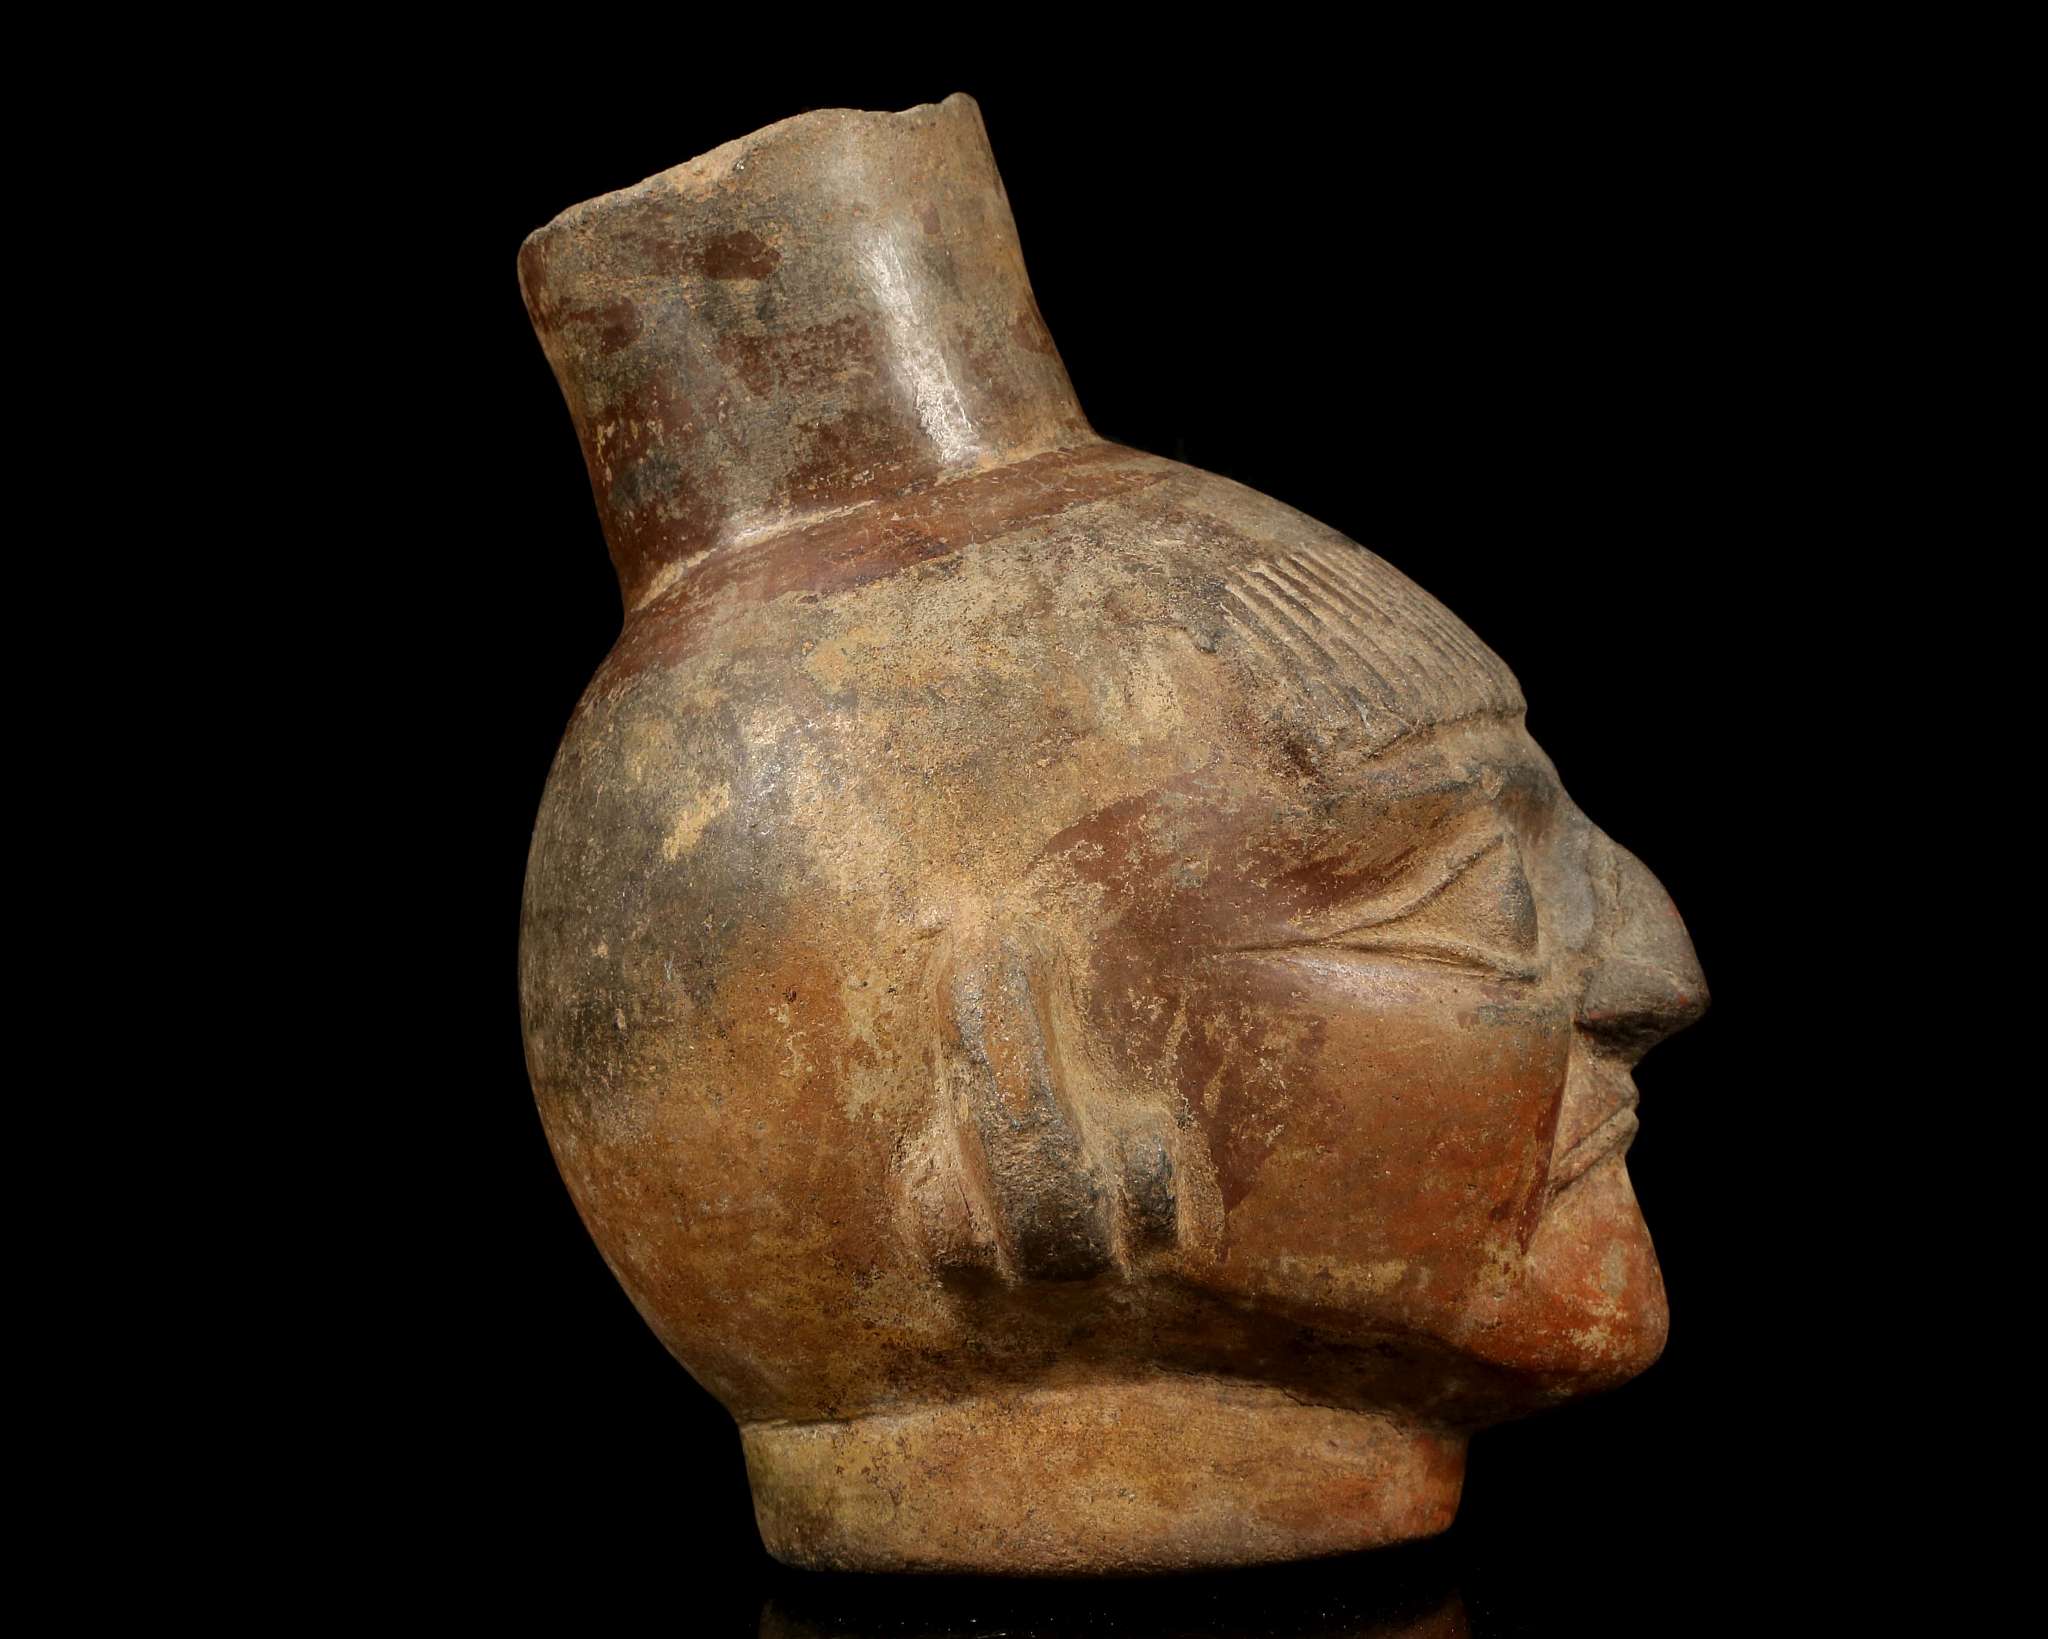 A MOCHE HEAD VESSEL, PERU Depicting the head of a man, possibly a priest, with a short fringe over - Image 5 of 5